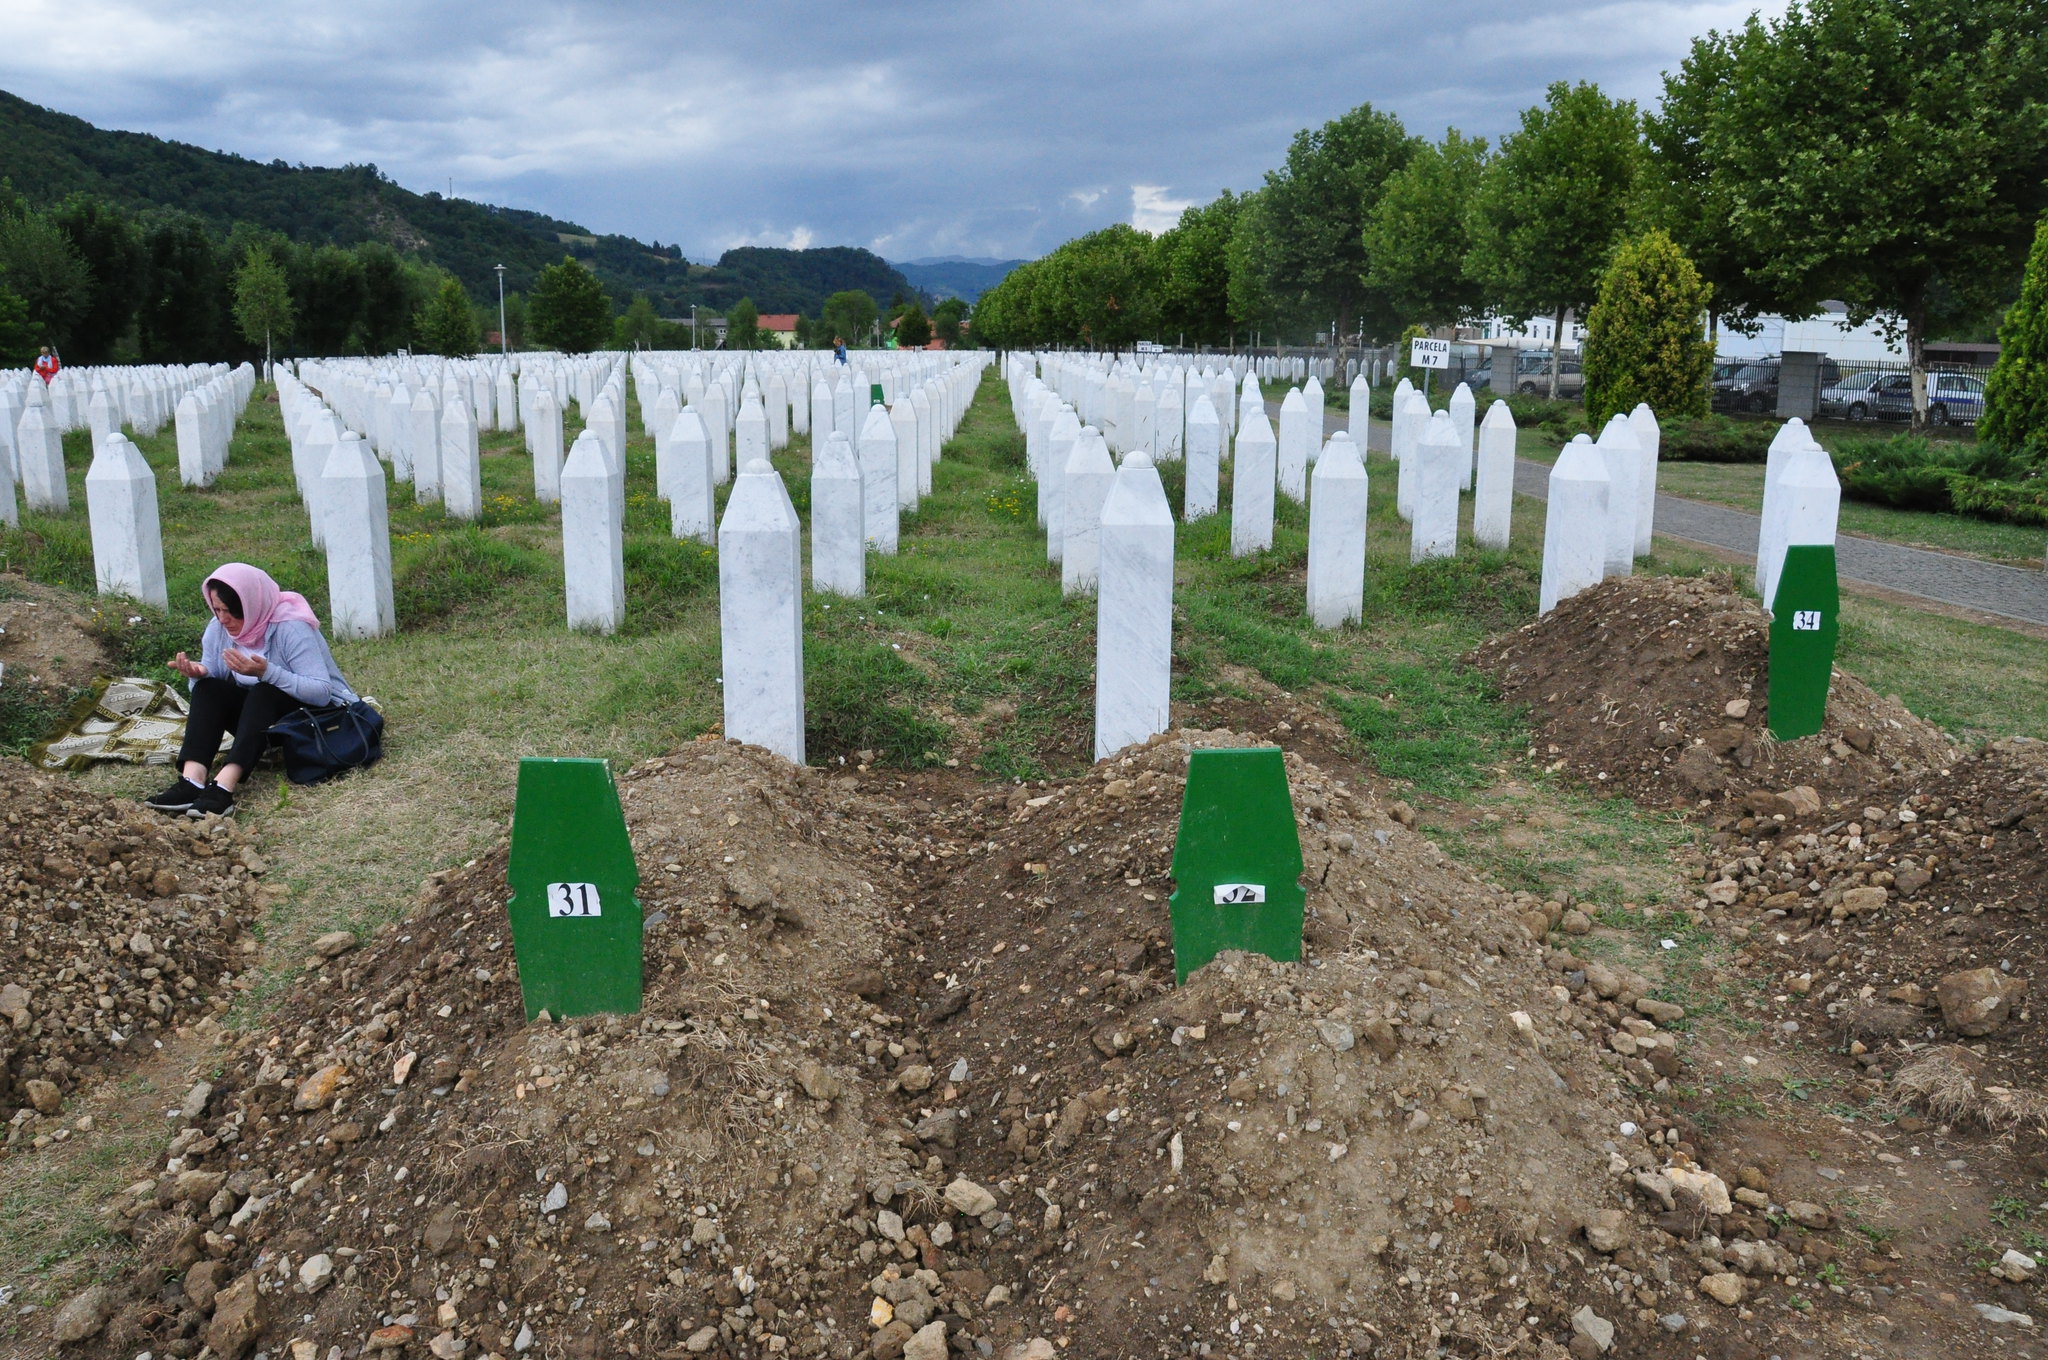 A grave site in Bosnia for victims of the genocide. In the foreground there are freshly dug graves with green markers on them and further back there is a field full of white stone grave markers